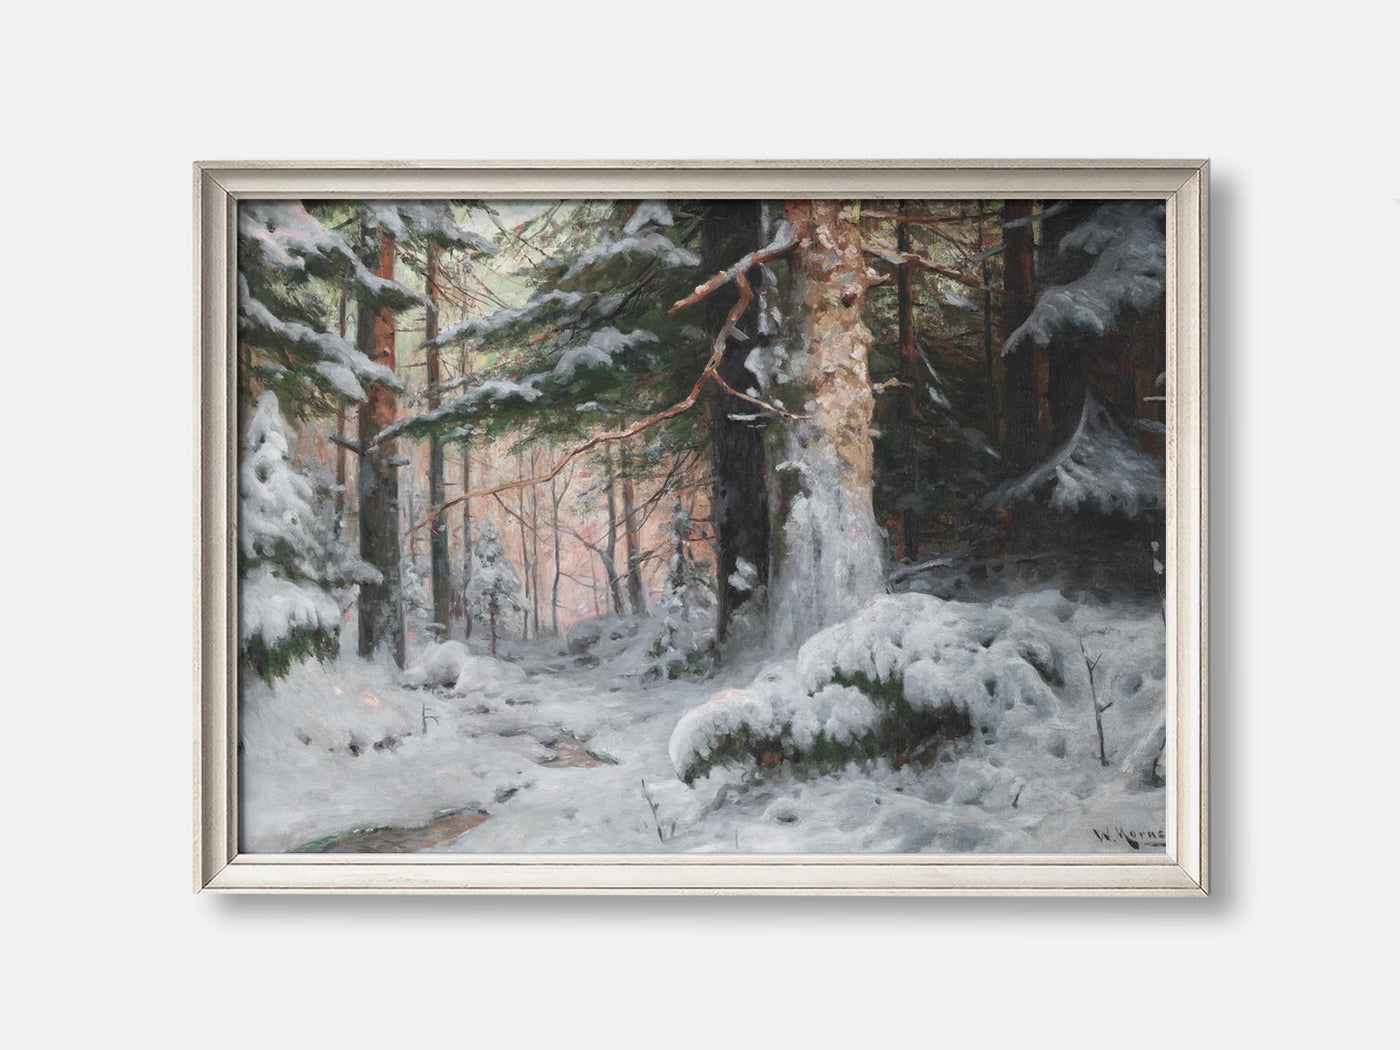 The Snowy Pine Forest mockup - A_w31-V1-PC_F+O-SS_1-PS_5x7-C_def variant